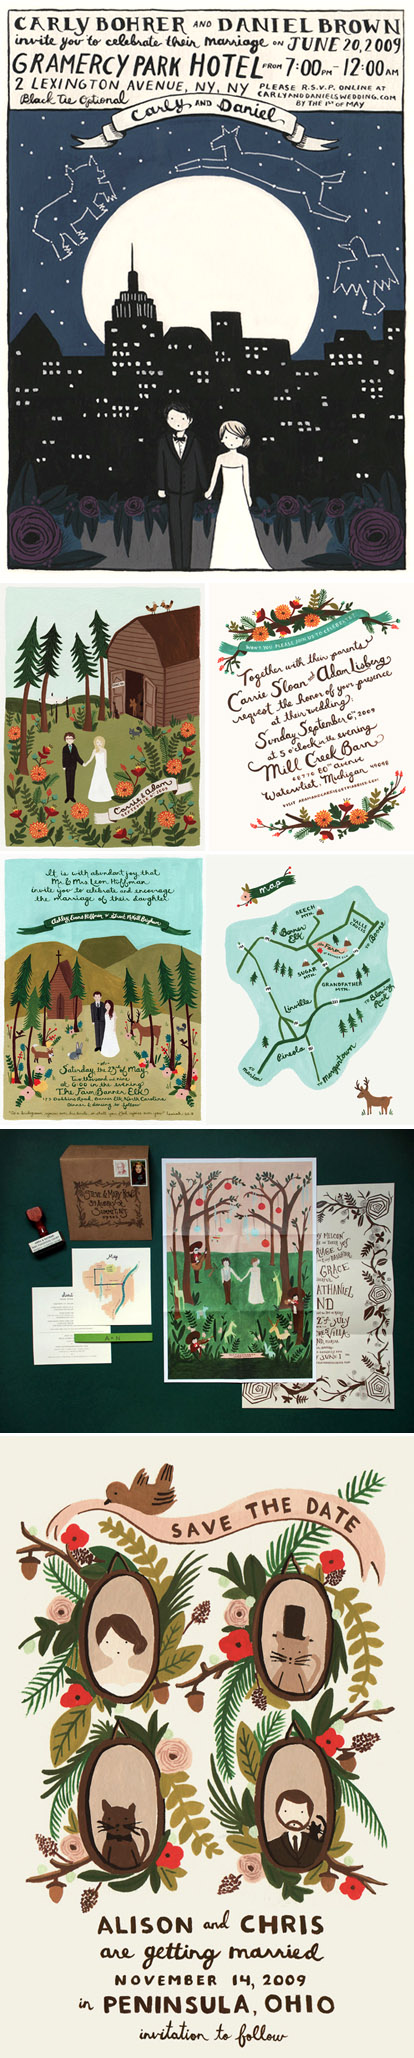 Custom wedding invitations and save-the-dates by Anna Bond of Rifle Paper Company